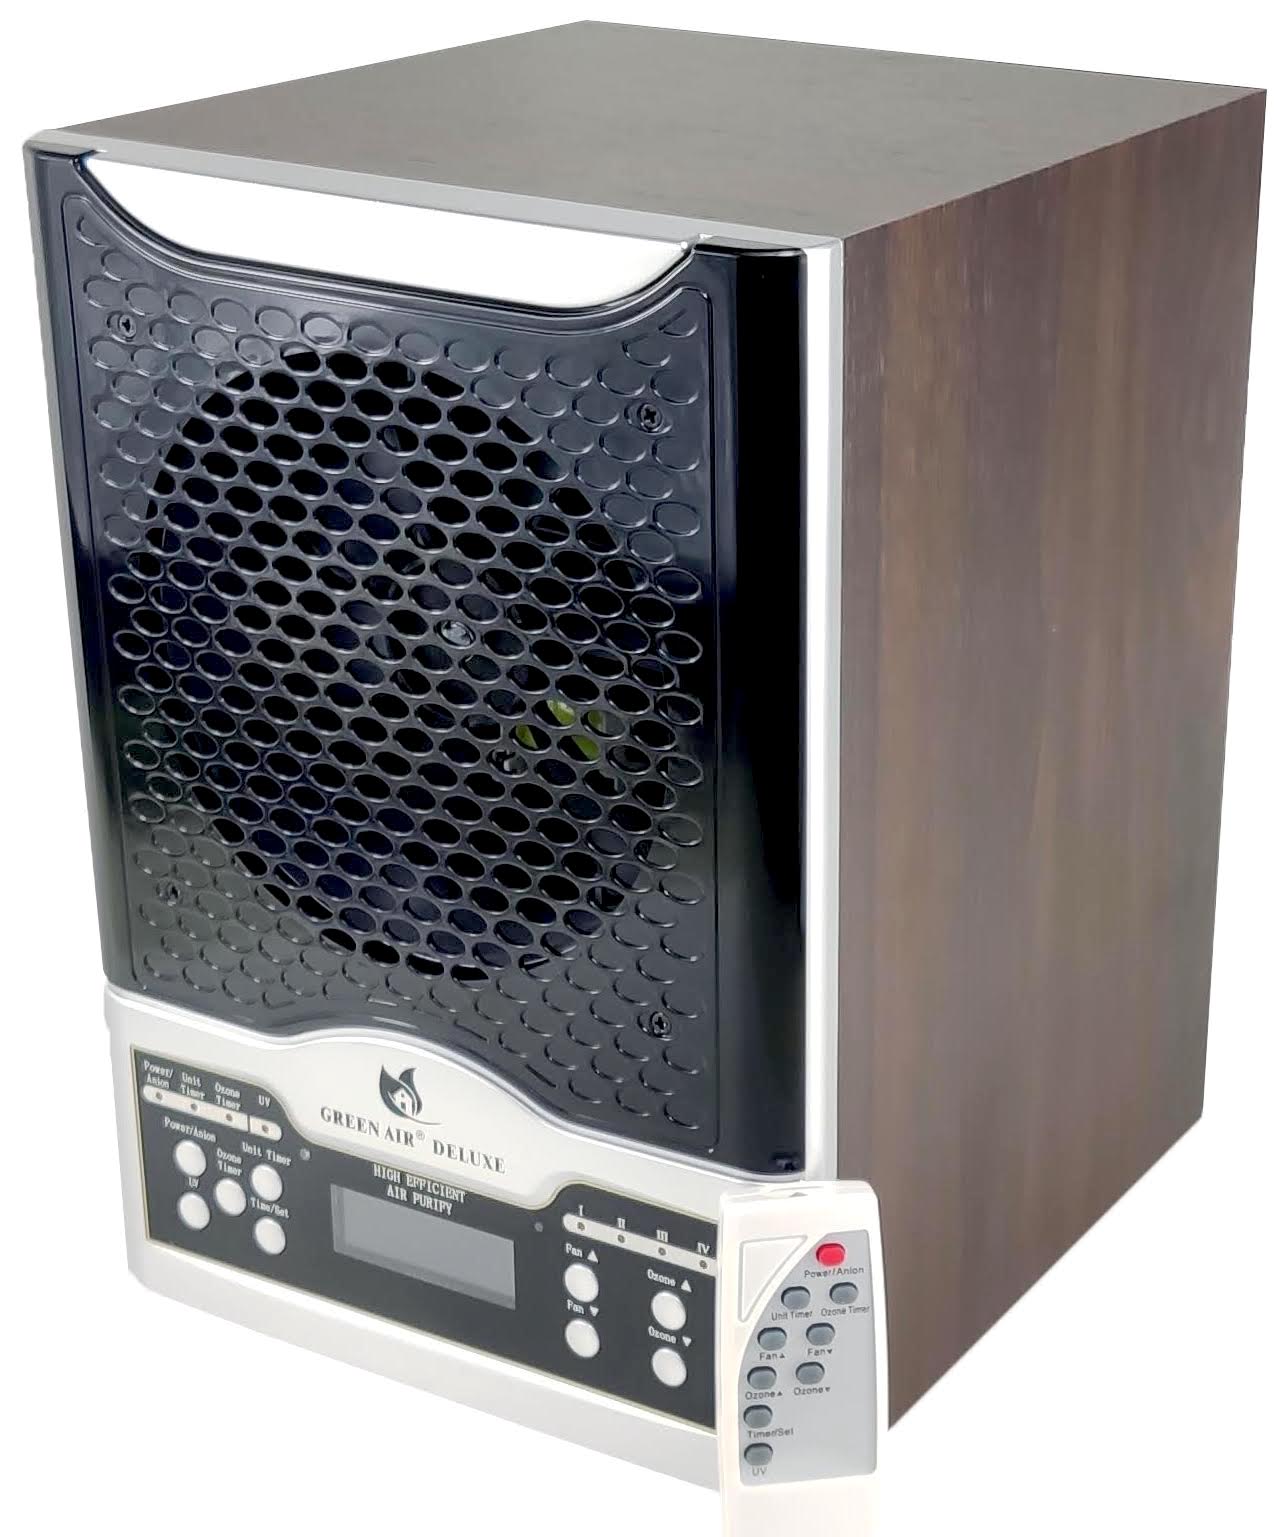 Green Air Purifiers Green Air Deluxe 3 plate hepa and carbon filter air purifier ozone generator